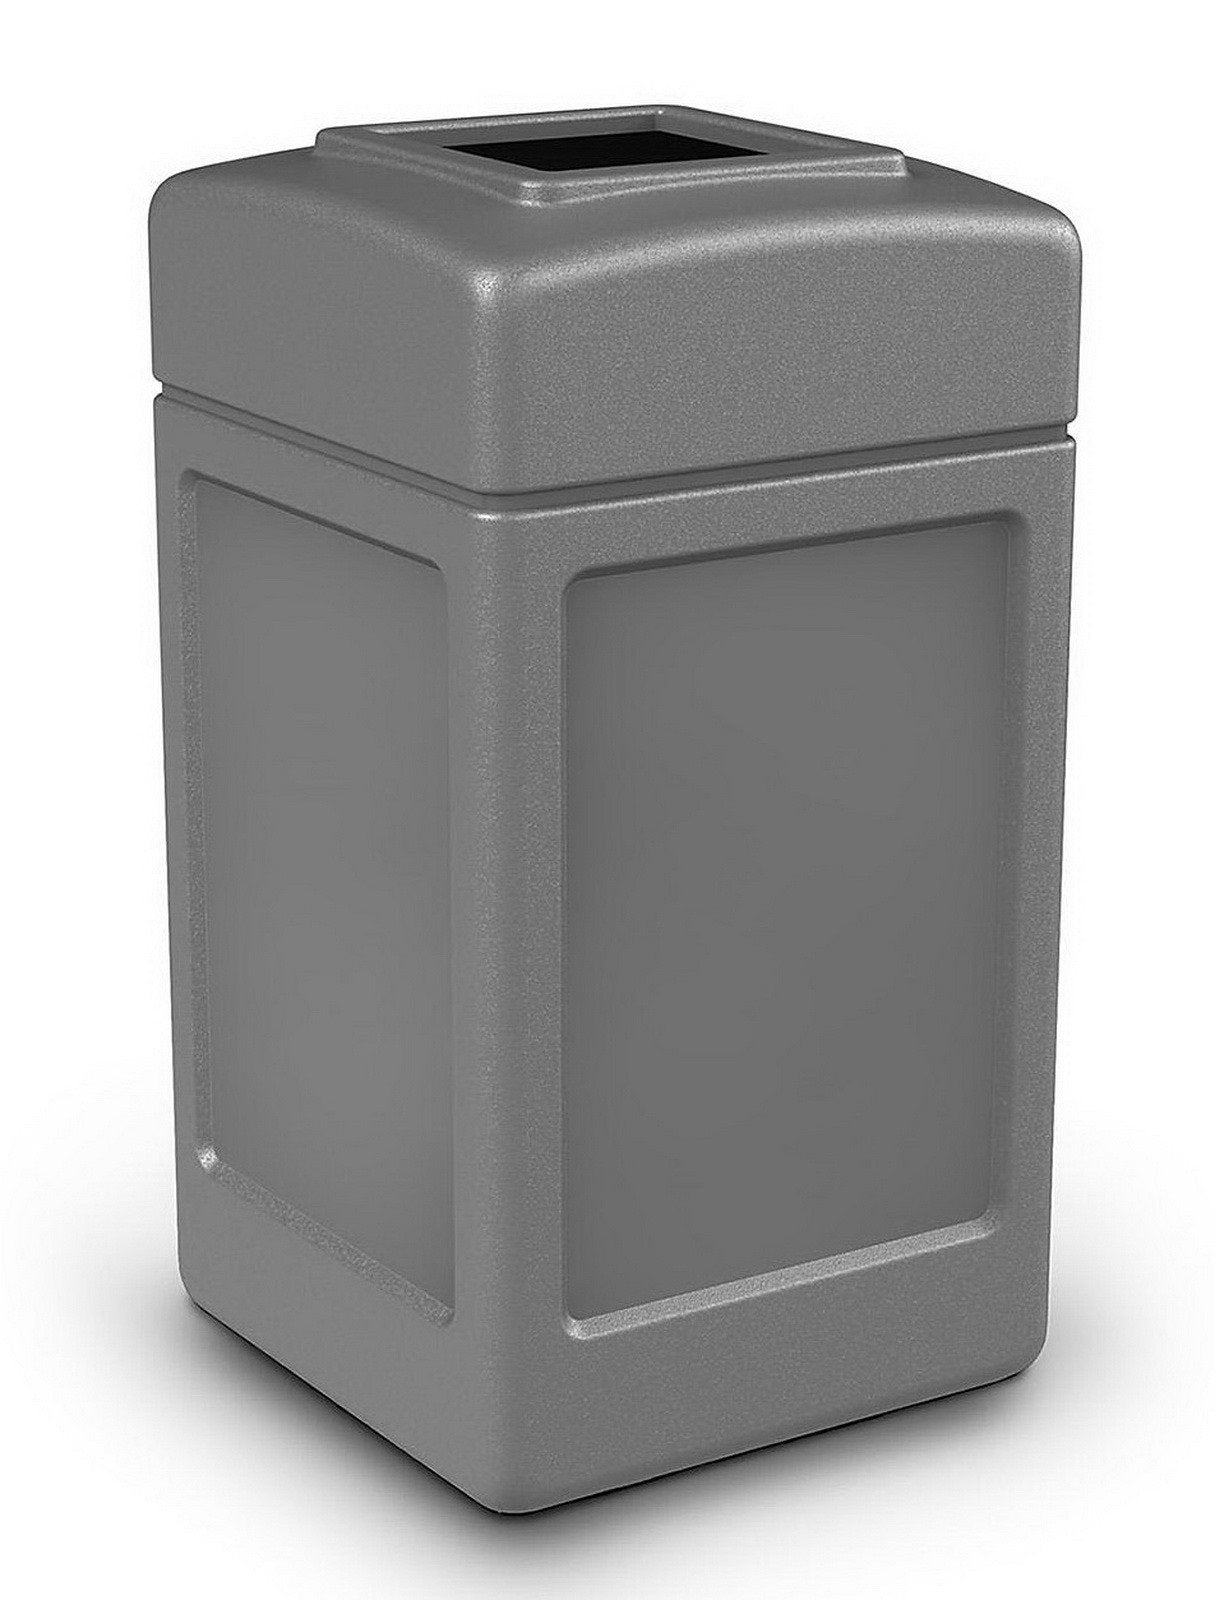 Commercial Outdoor Trash Can Large 42 Gallon Site Lot Garbage Waste Container